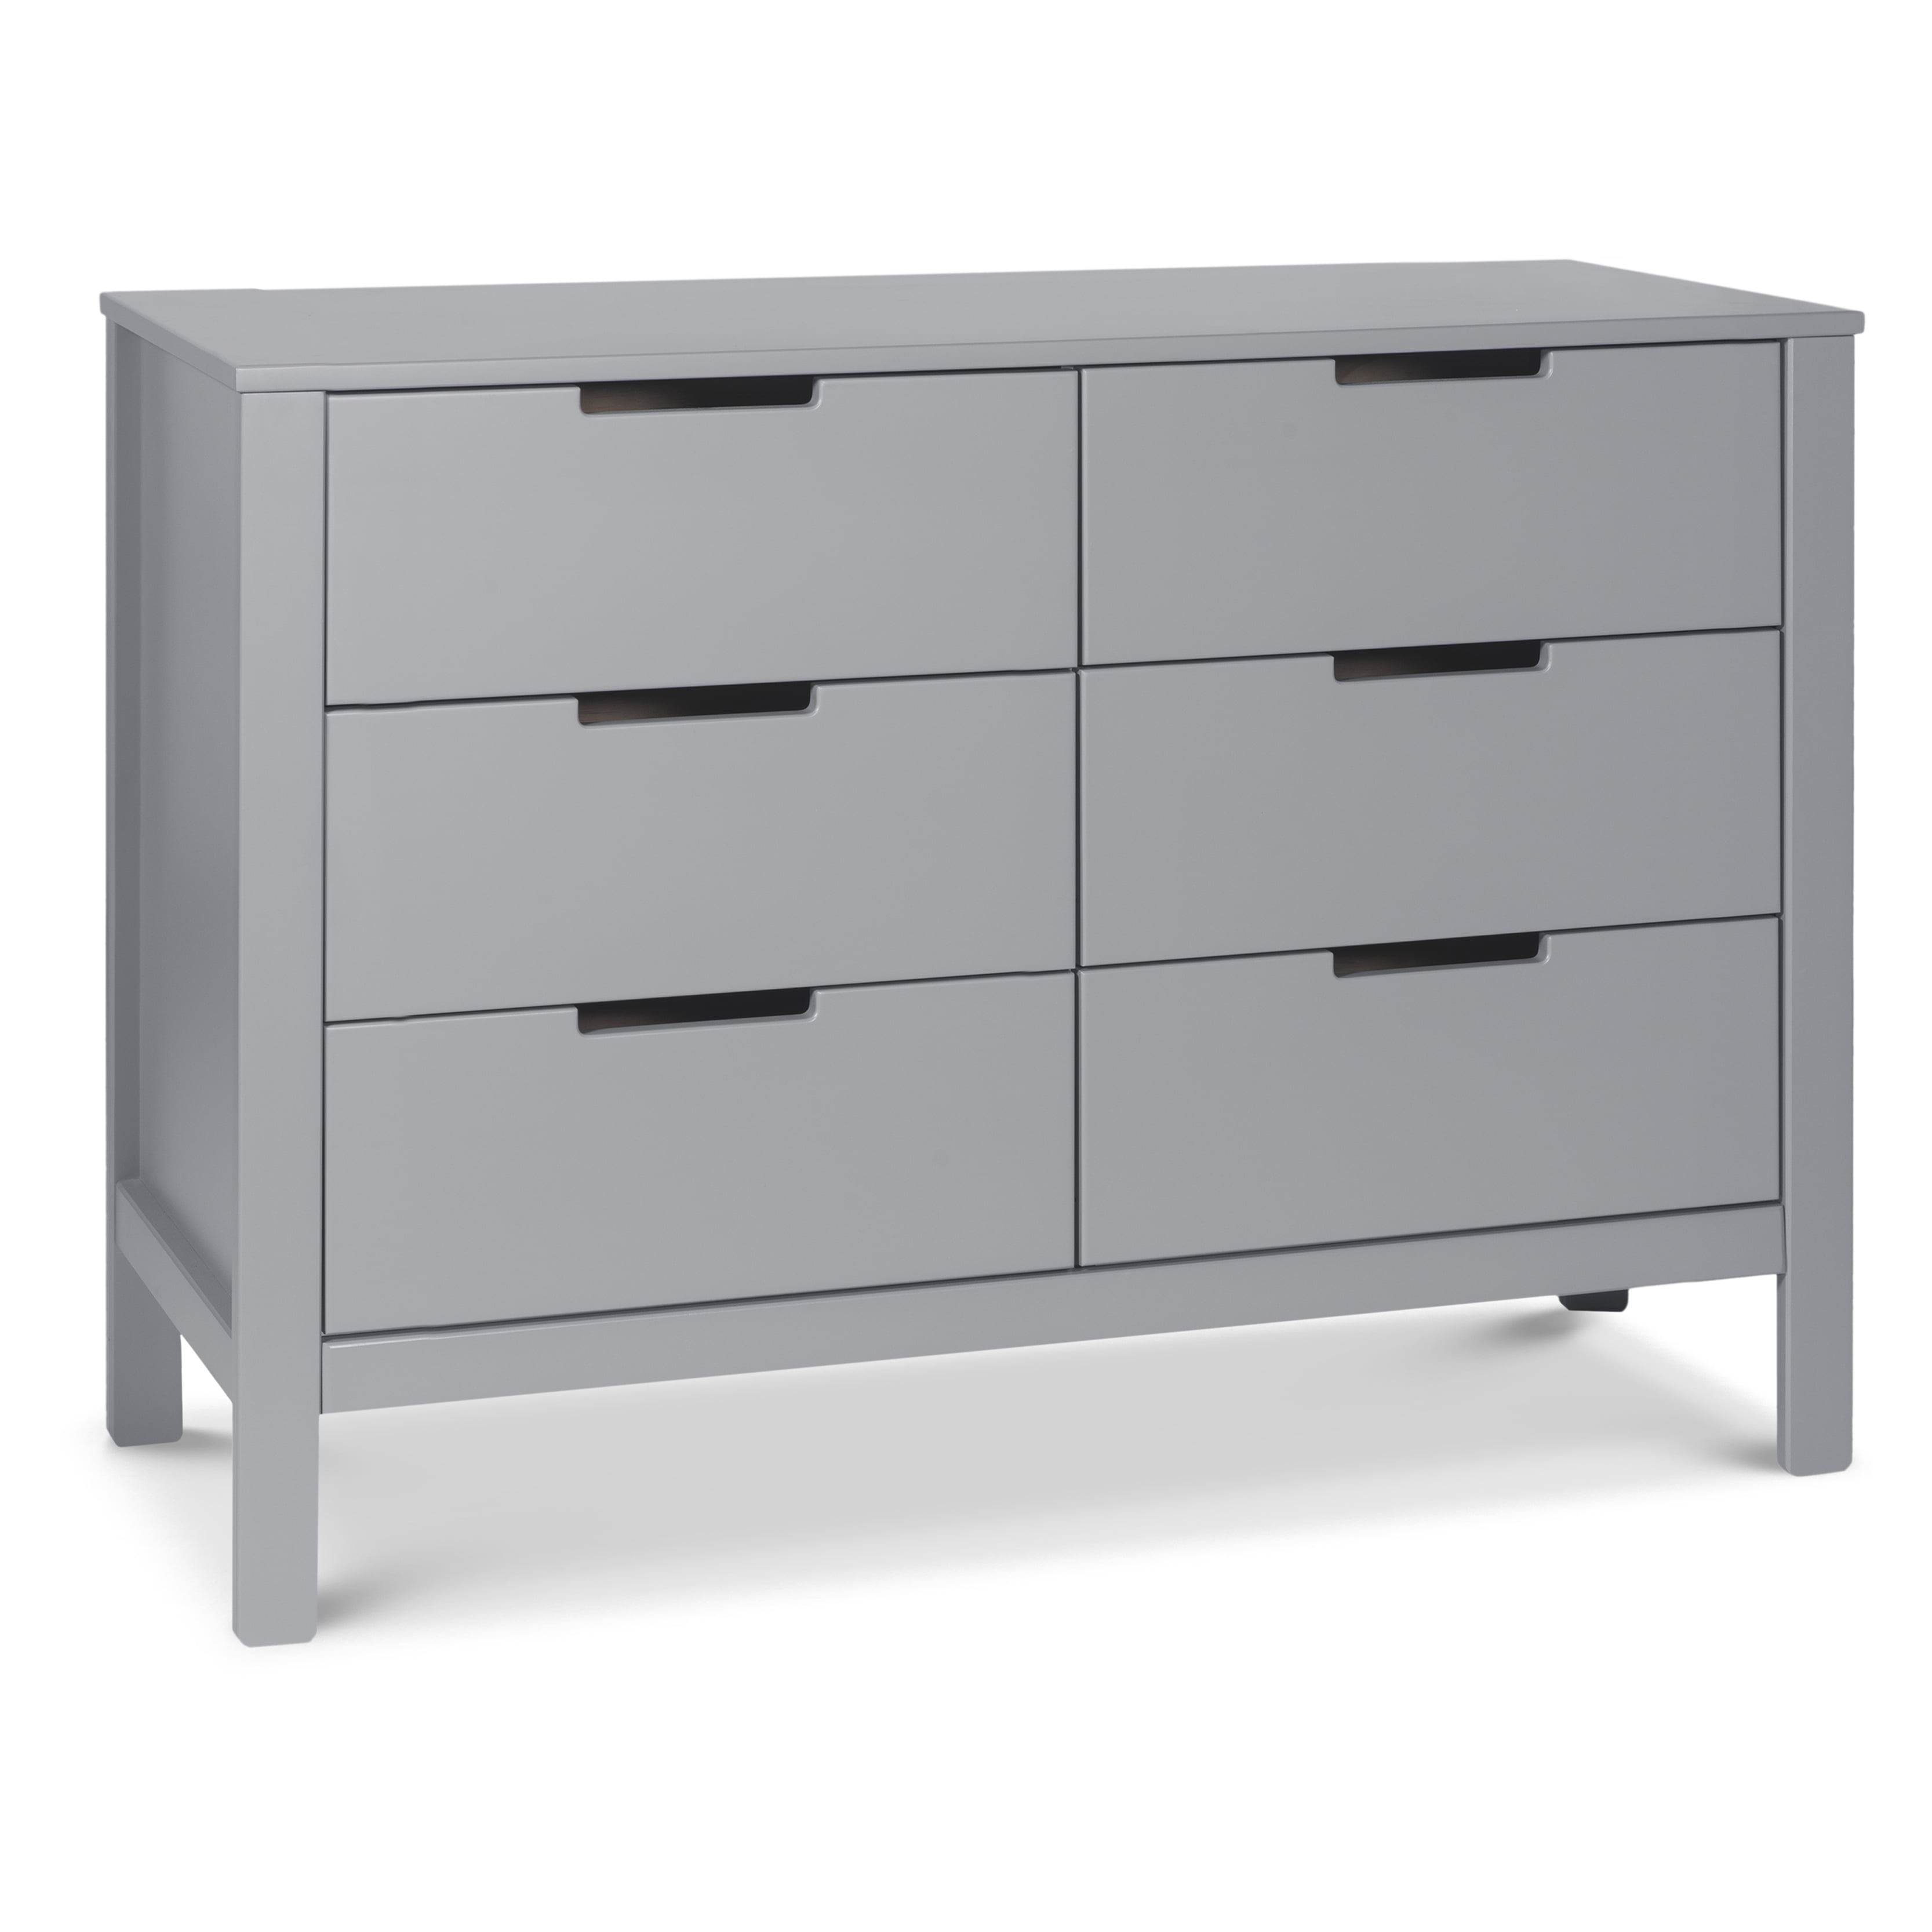 Carter's by DaVinci Colby 6Drawer Dresser in Gray